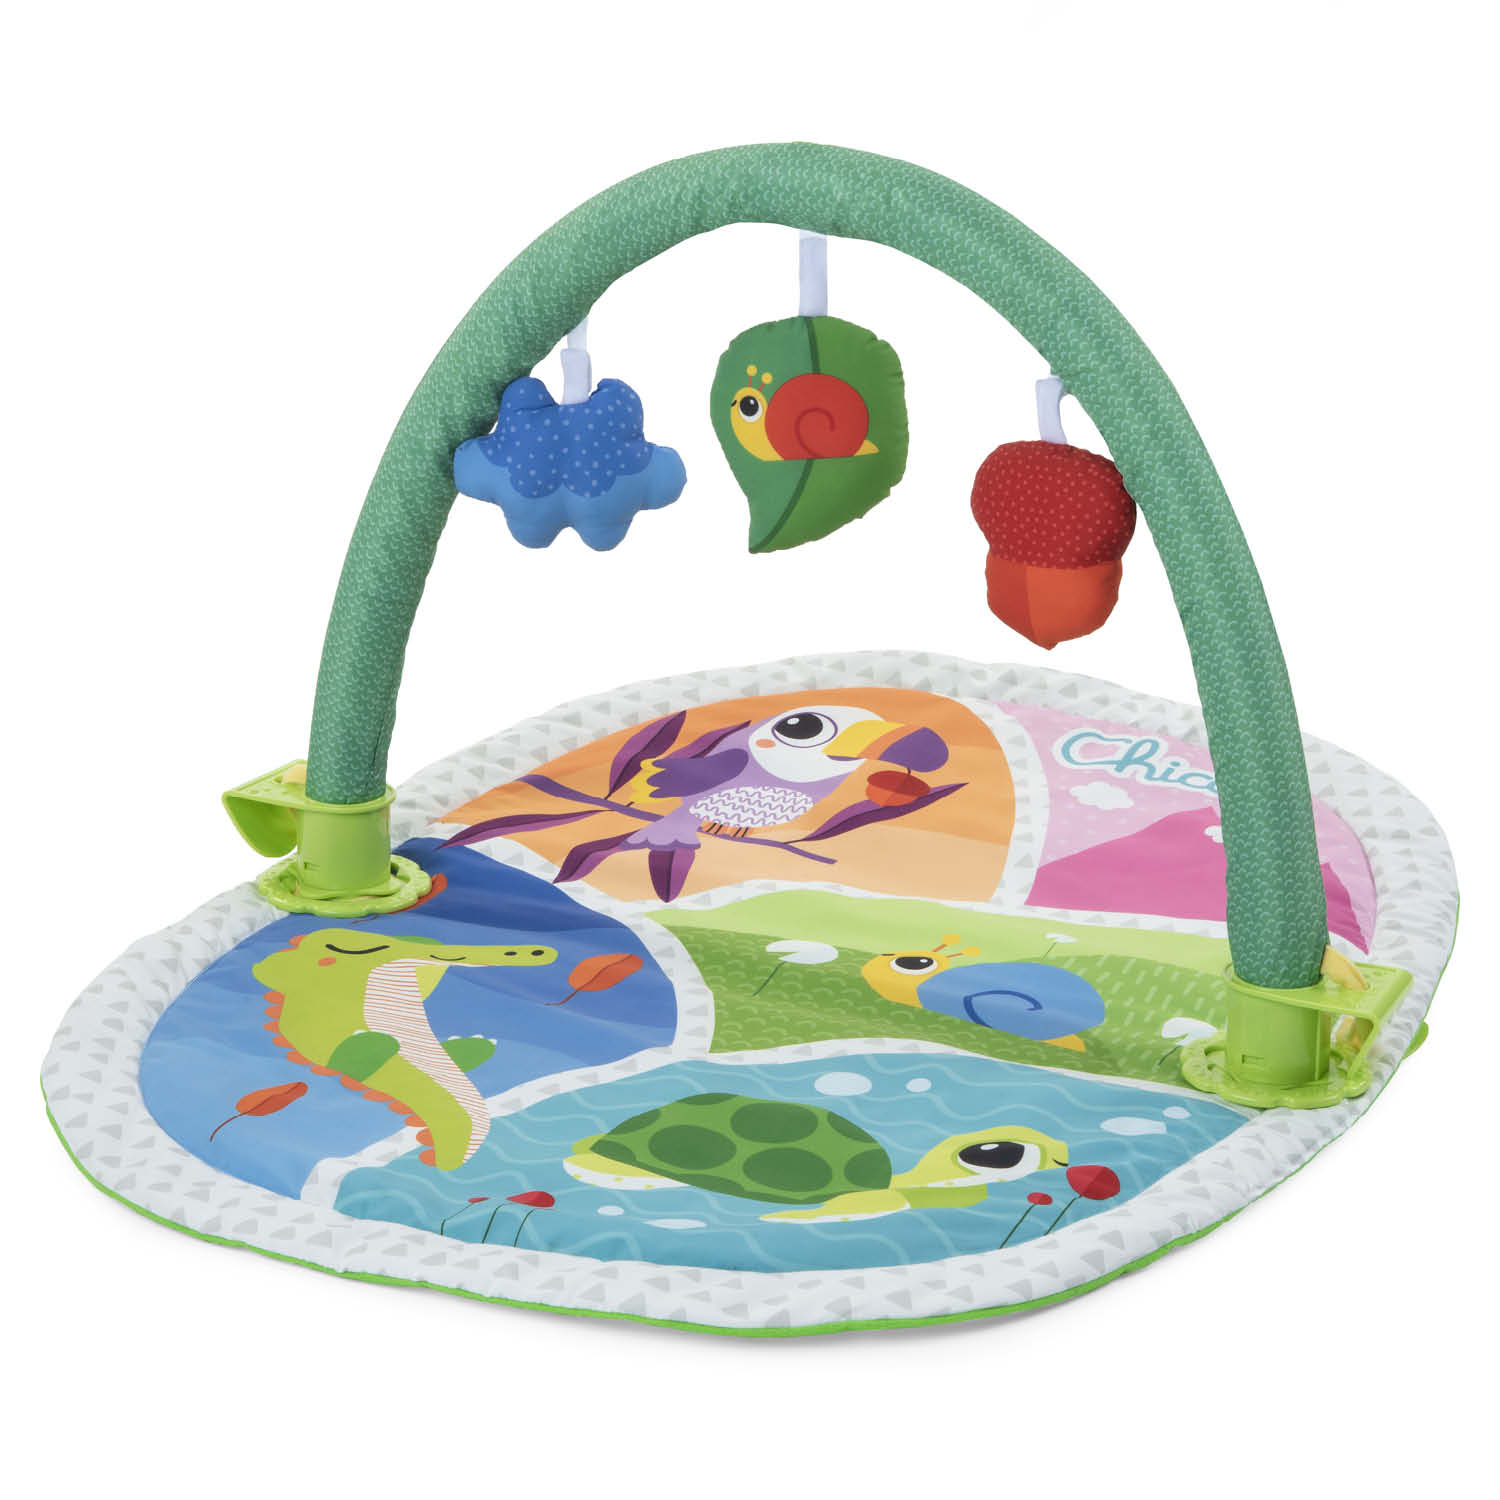 Toy New 3in1 Activity Gym